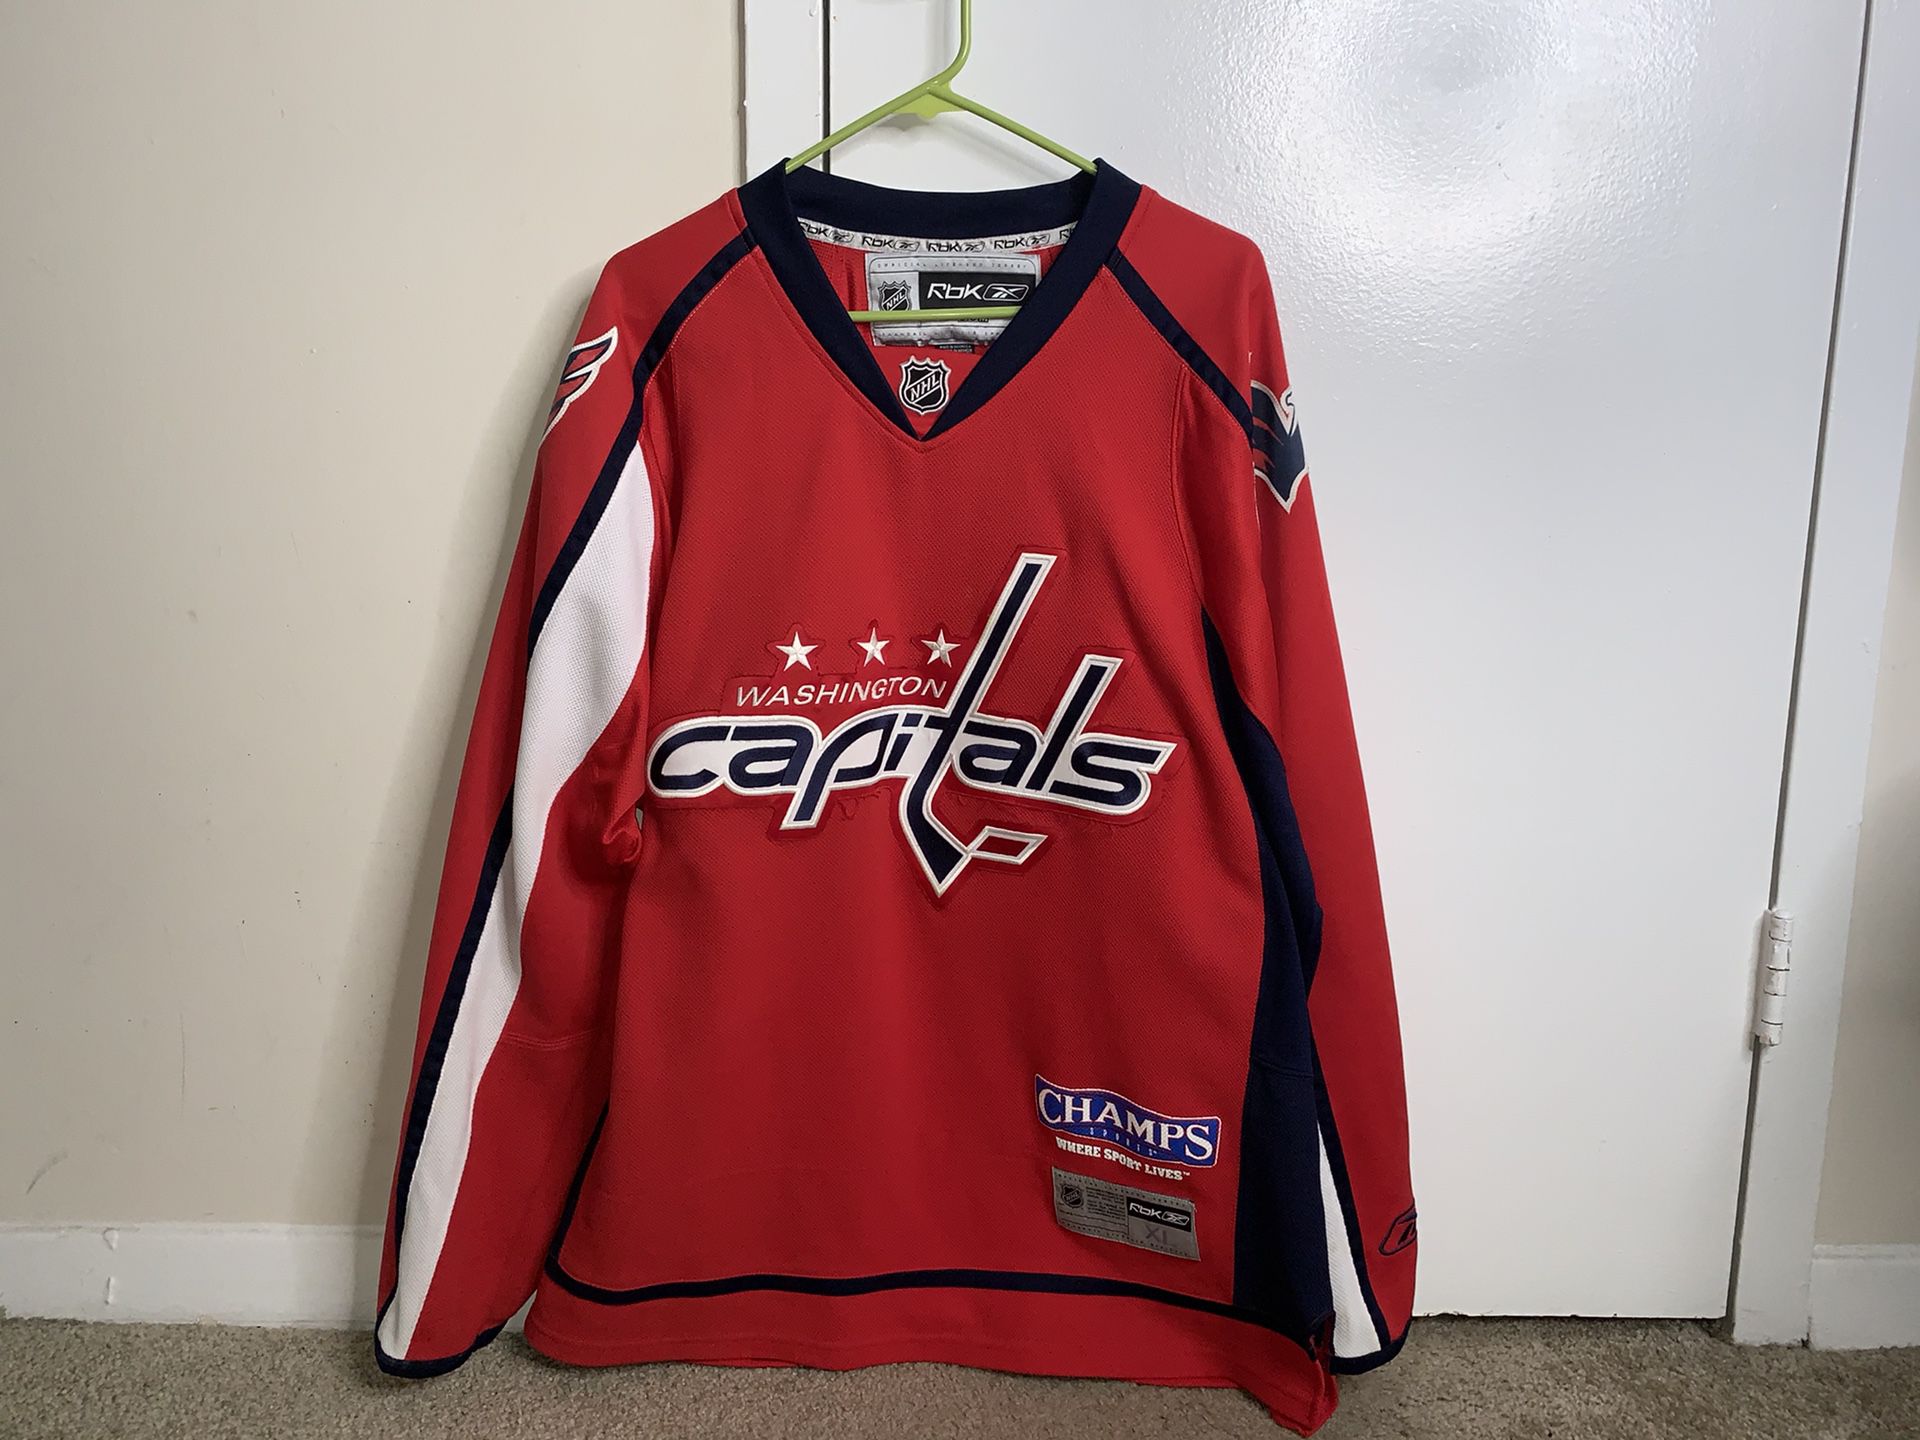 Washington Capitals XL Rebok Champs Jersey (used) blank: no name or number